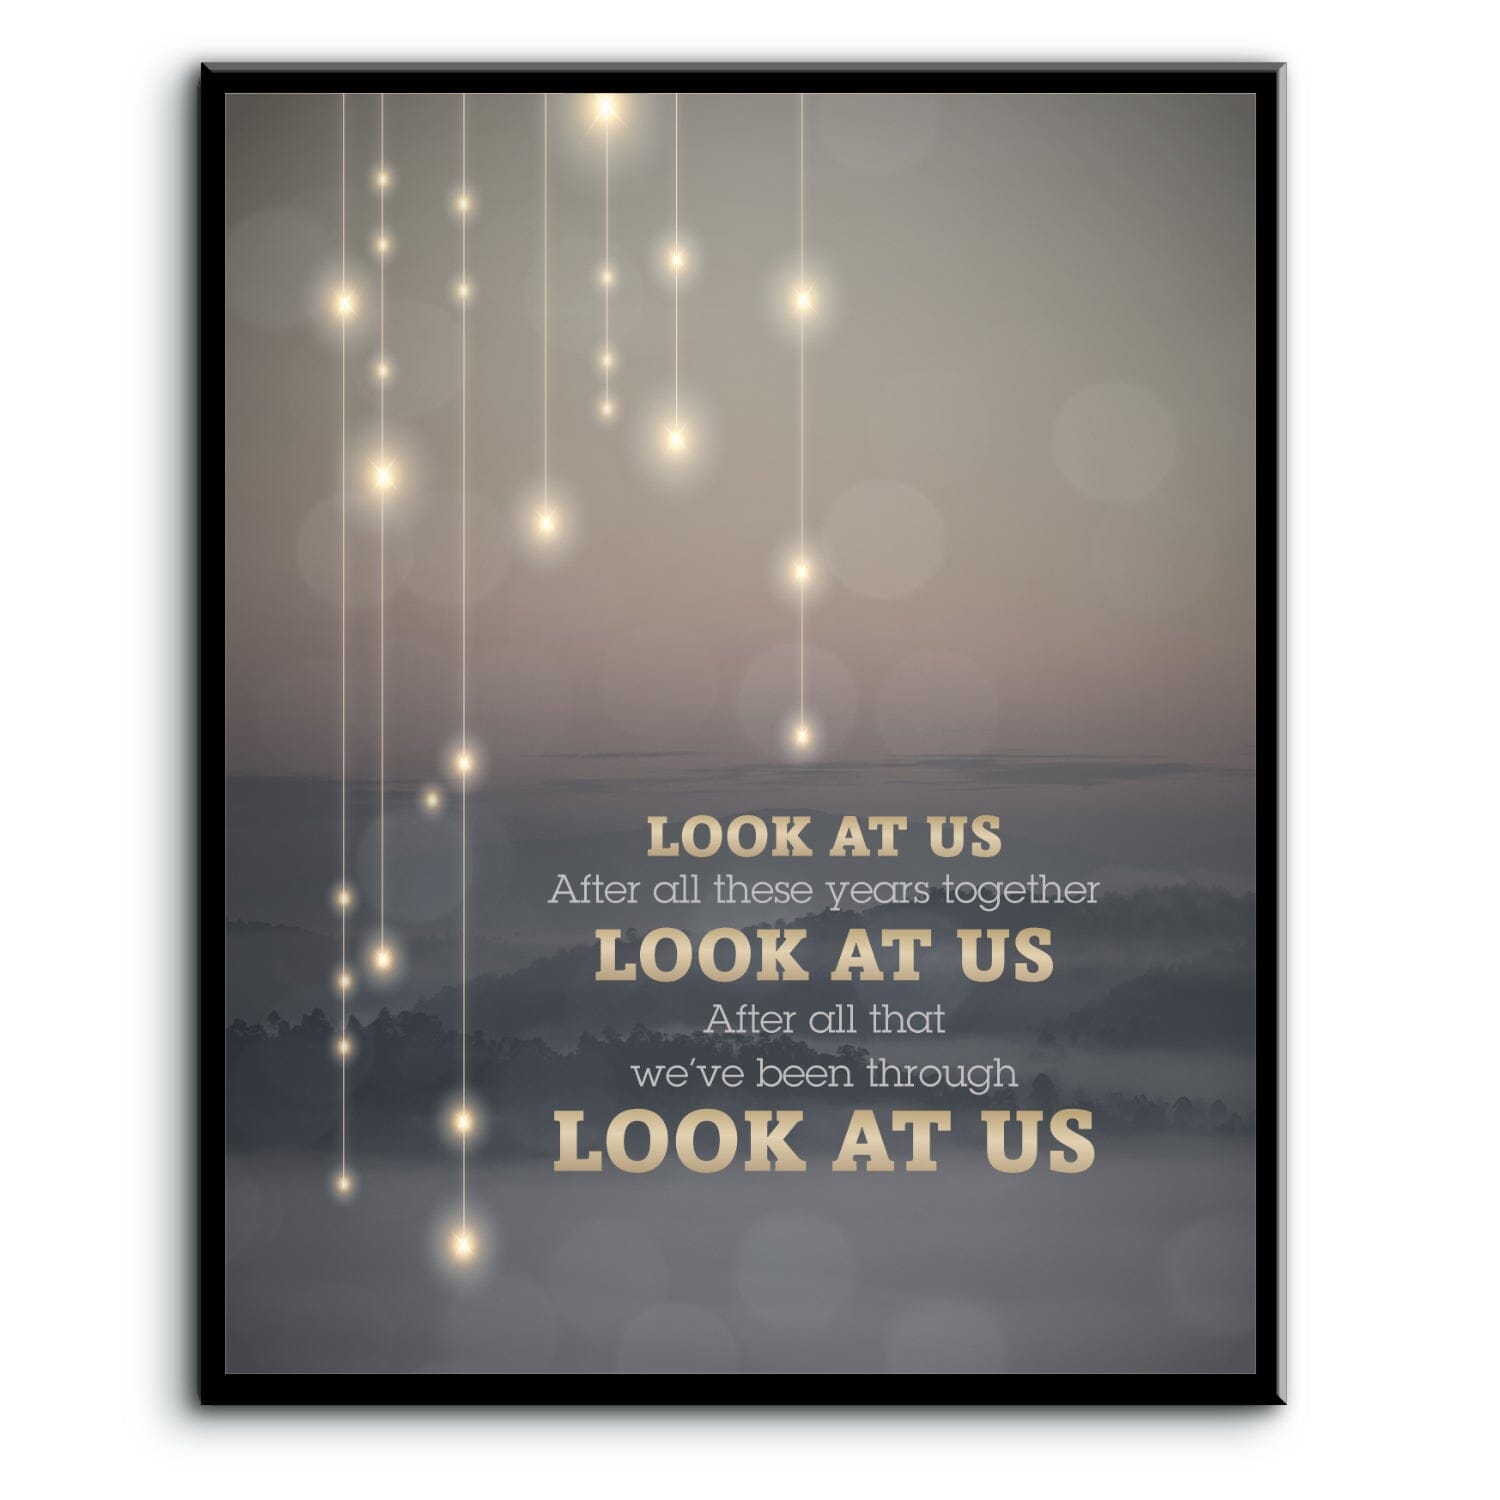 Look at Us by Vince Gill - Pop Country Song Art Song Lyrics Art Song Lyrics Art 8x10 Plaque Mount 